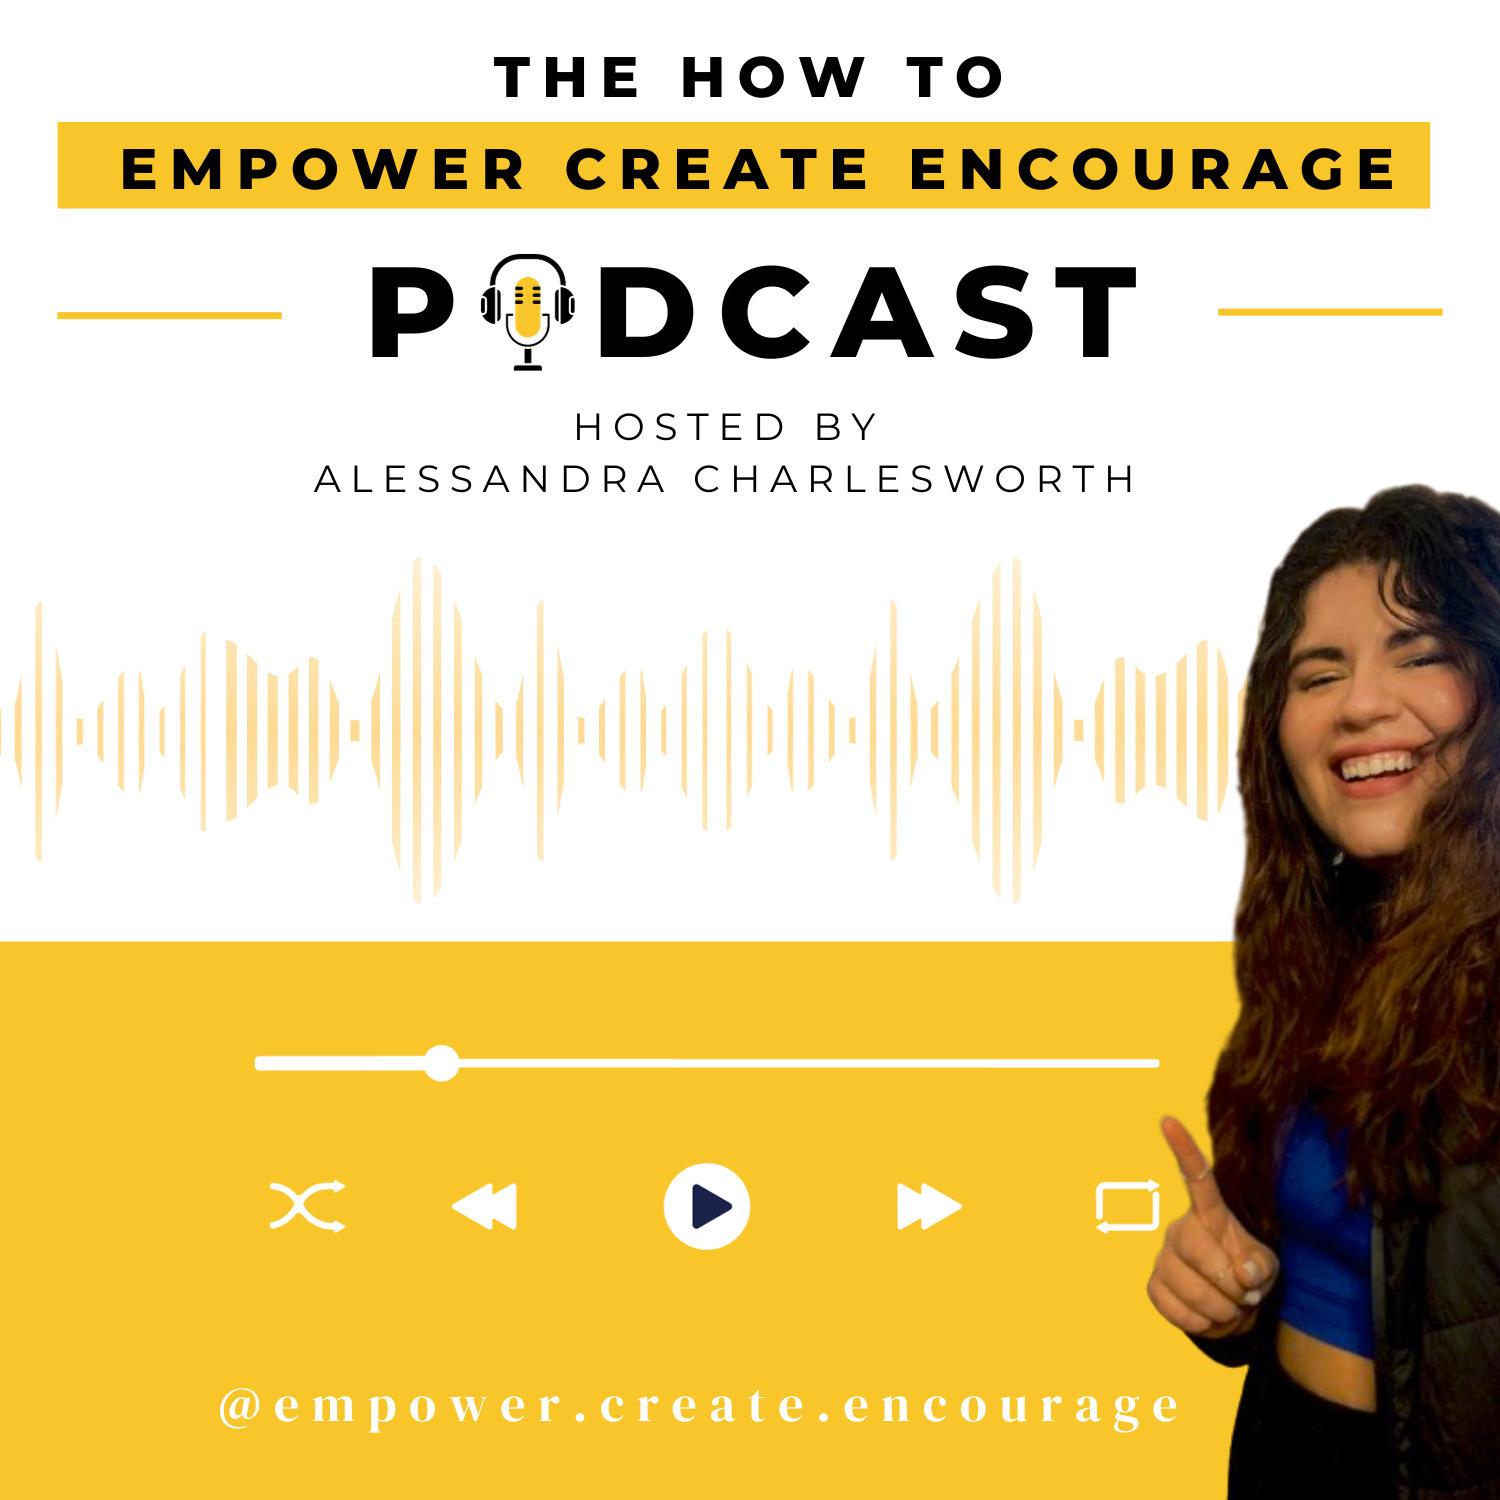 The How to Empower Create Encourage Podcast